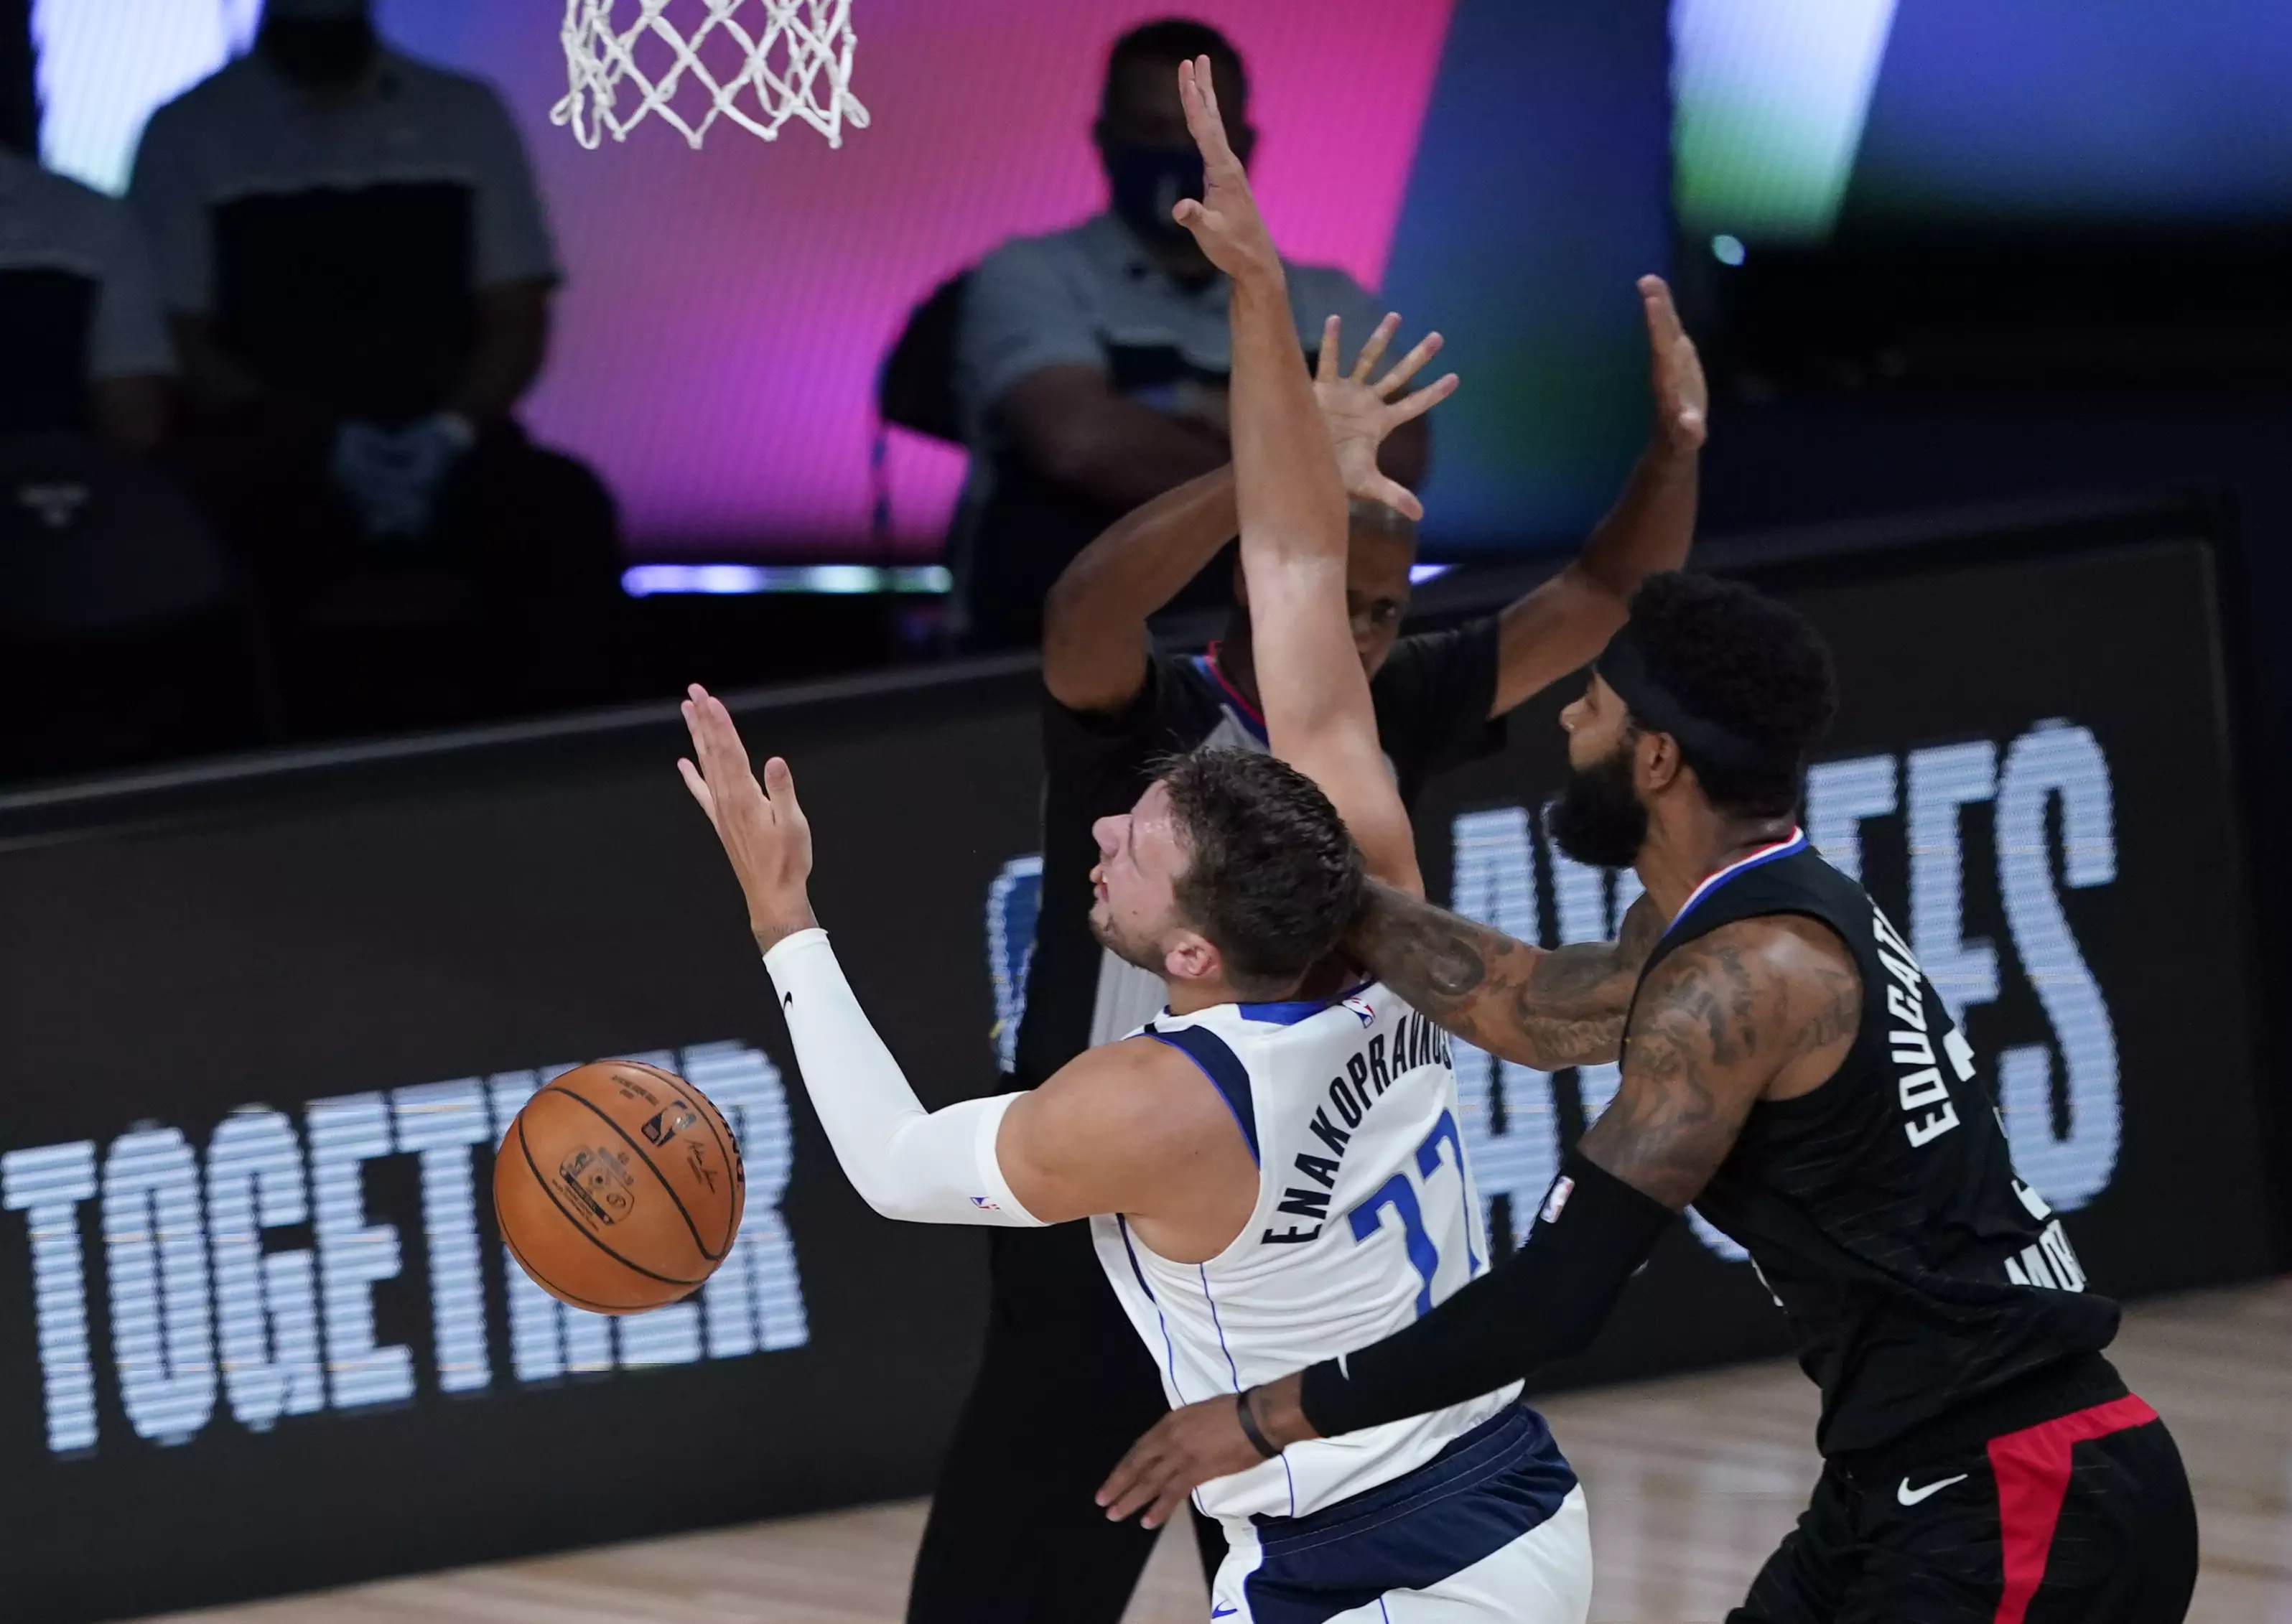 Doncic was clearly fouled by Morris.